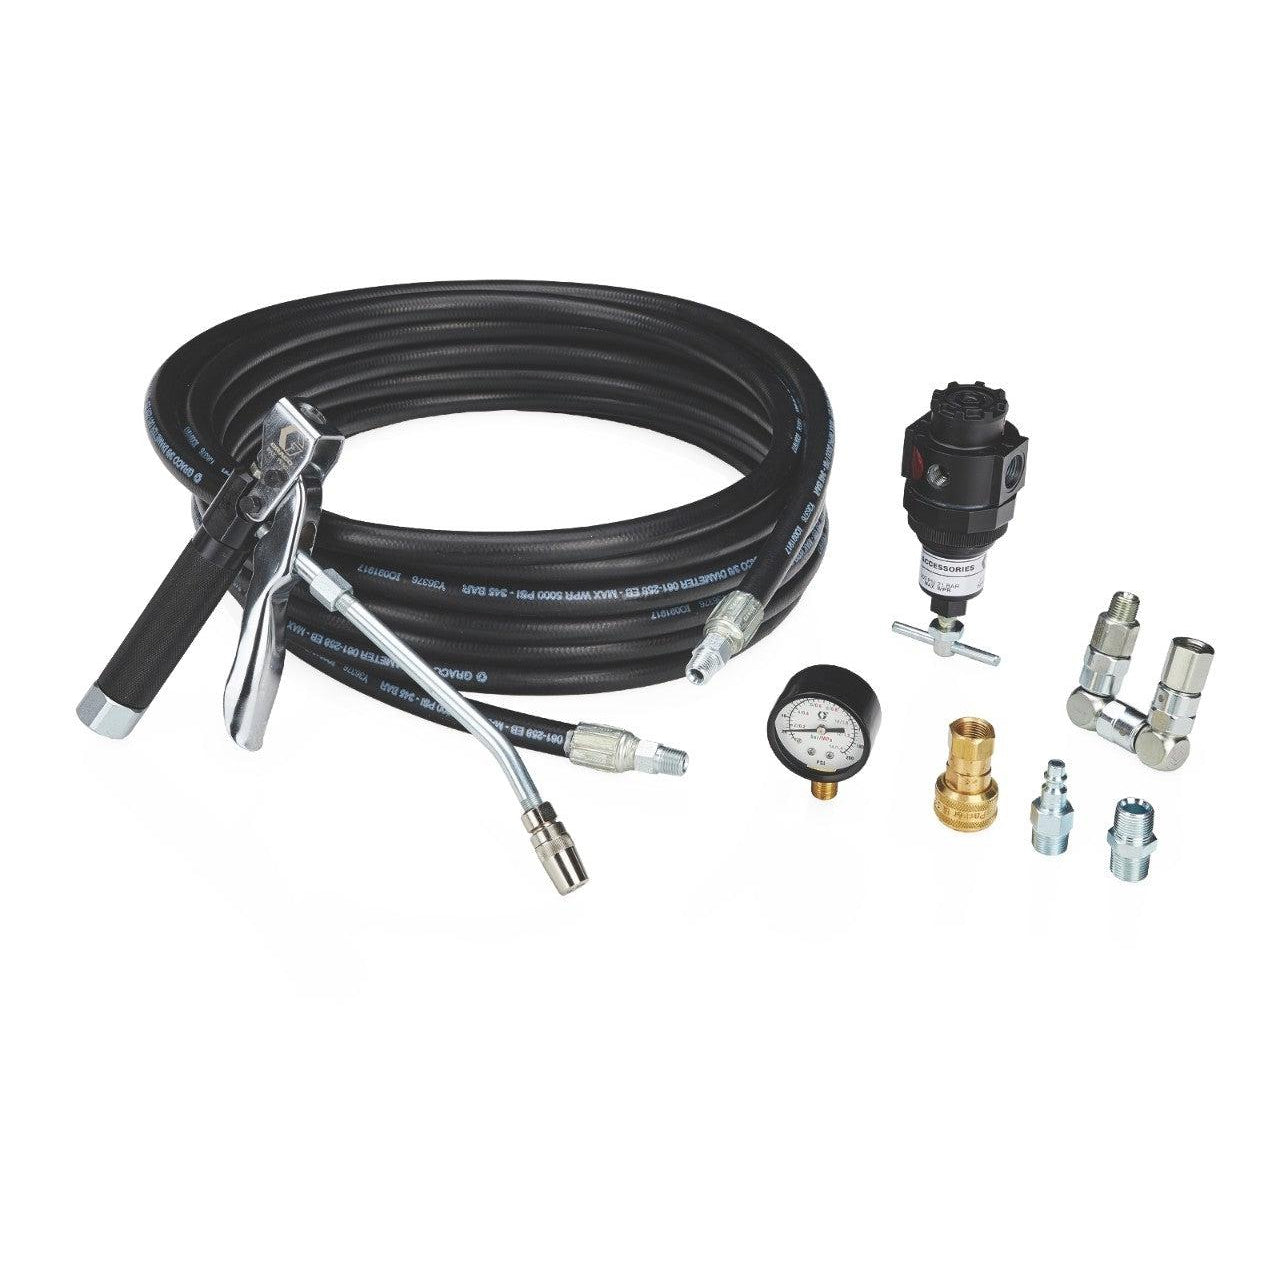 Dispense Kit for Fire-Ball® 300 15:1 Grease Pump Packages - 15 ft (14.5 m) Hose